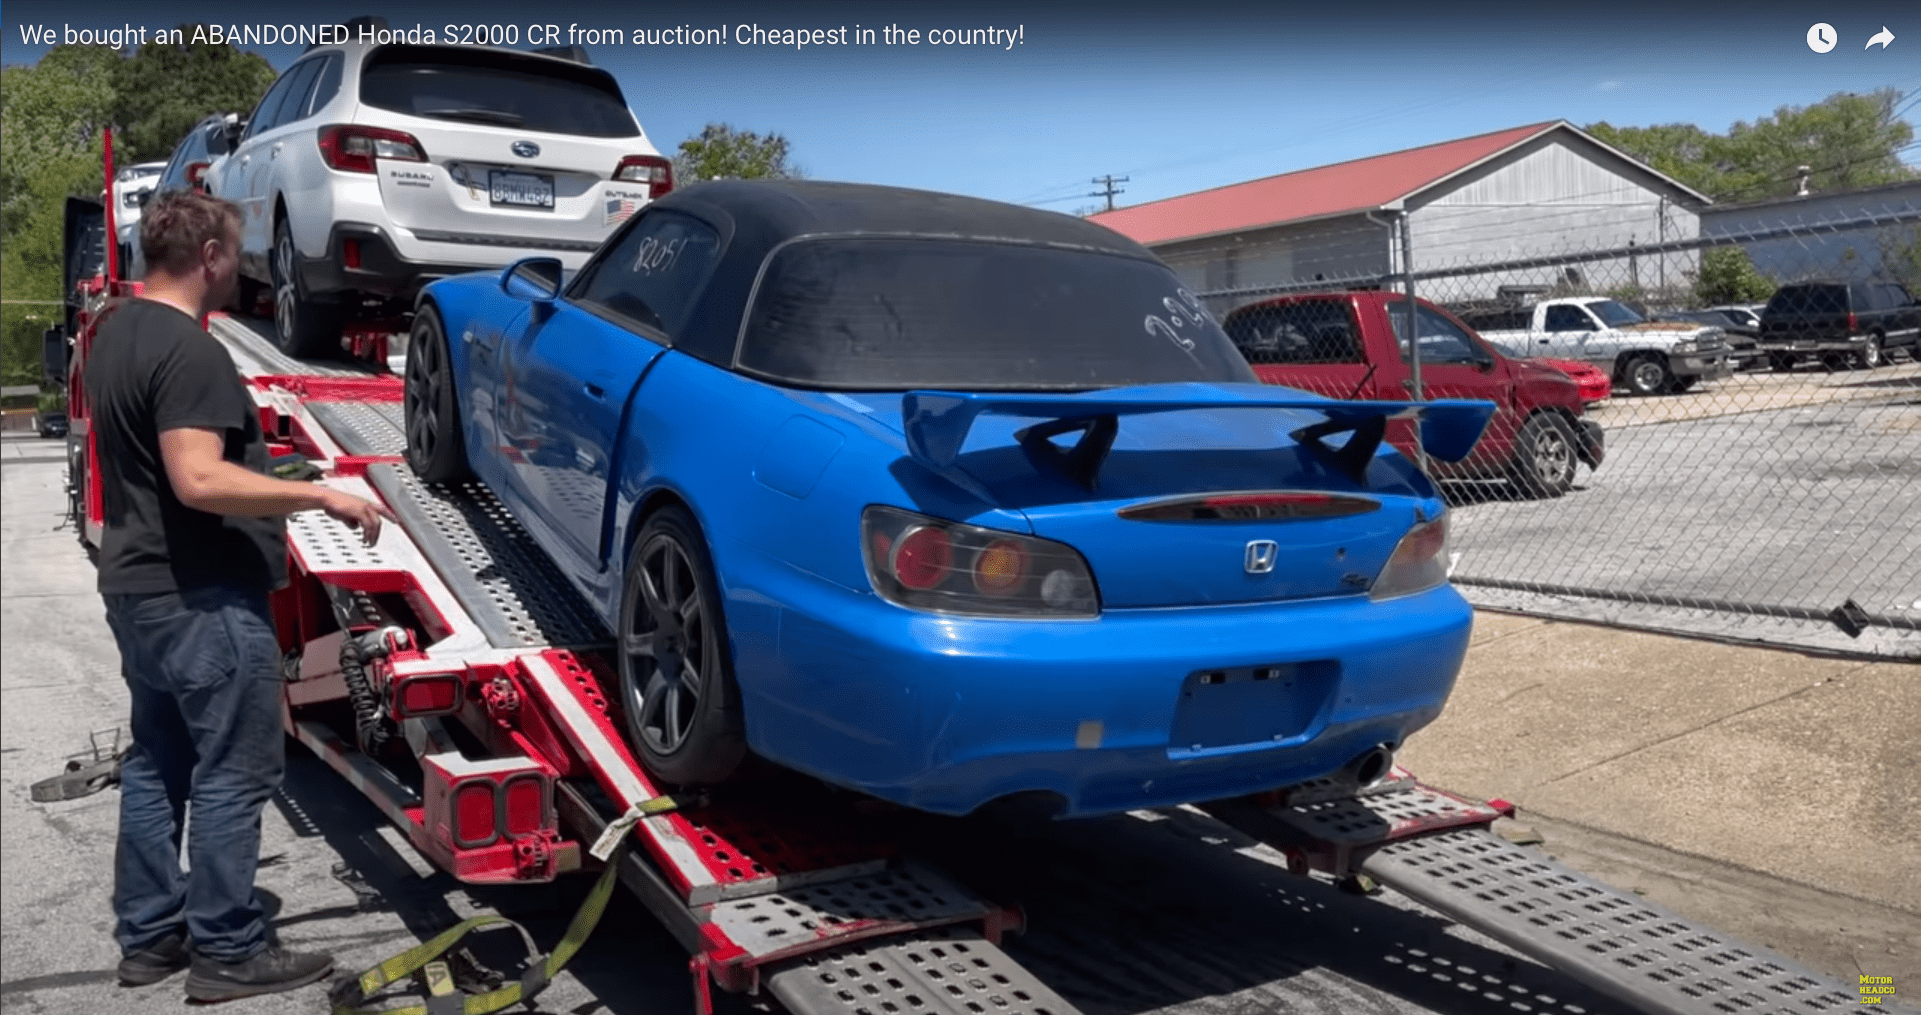 Honda S2000 CR, Shipped from Auction to Customer in less than 10 Days